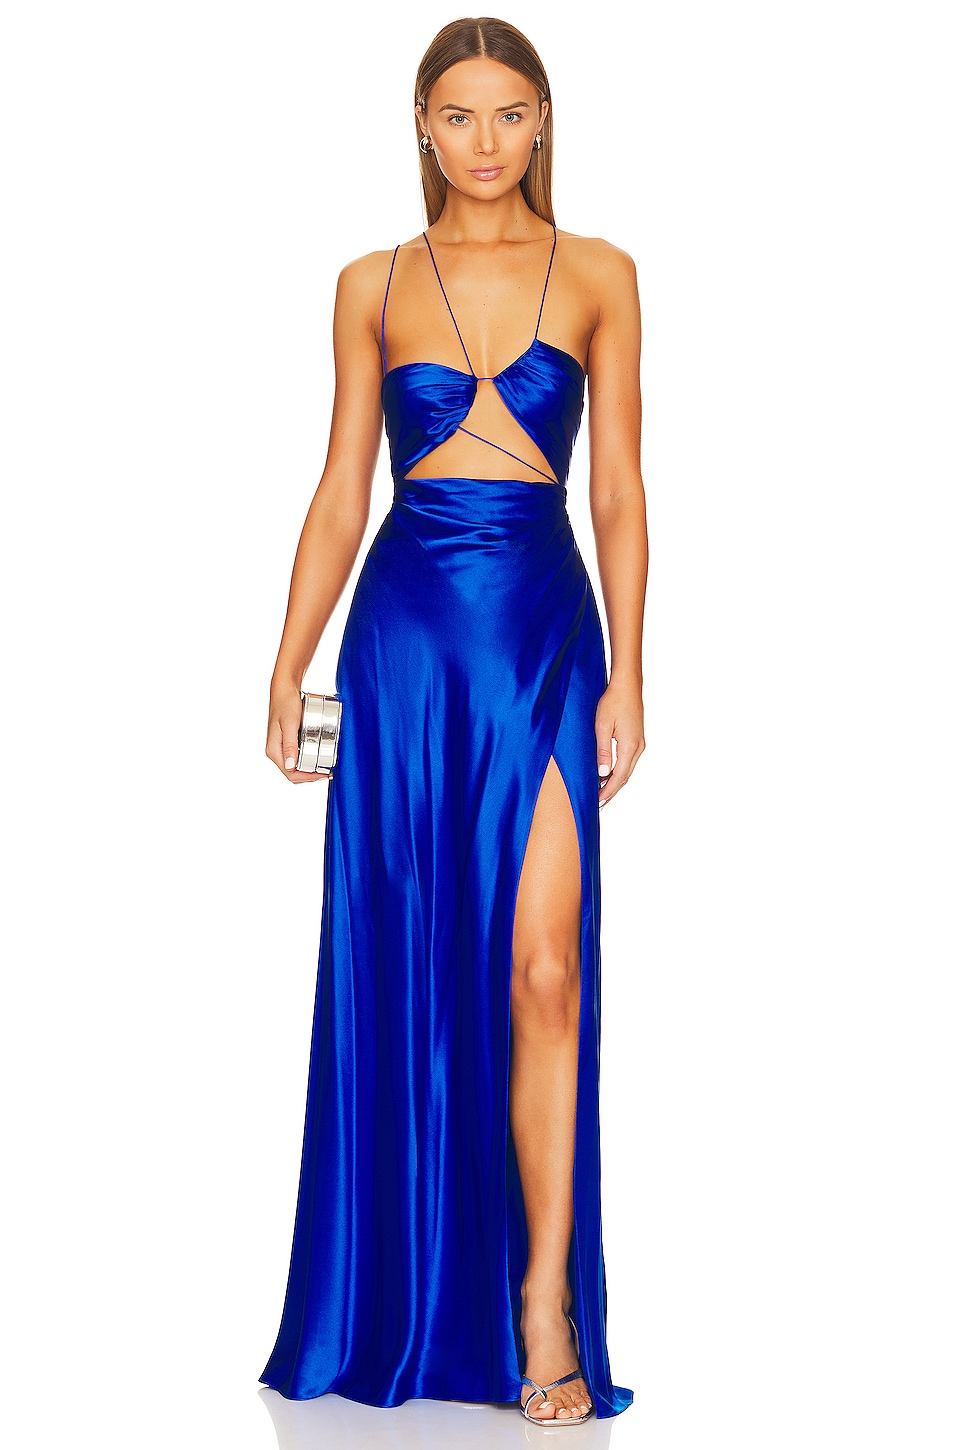 The Sei Asymmetrical Strappy Gown in Sapphire